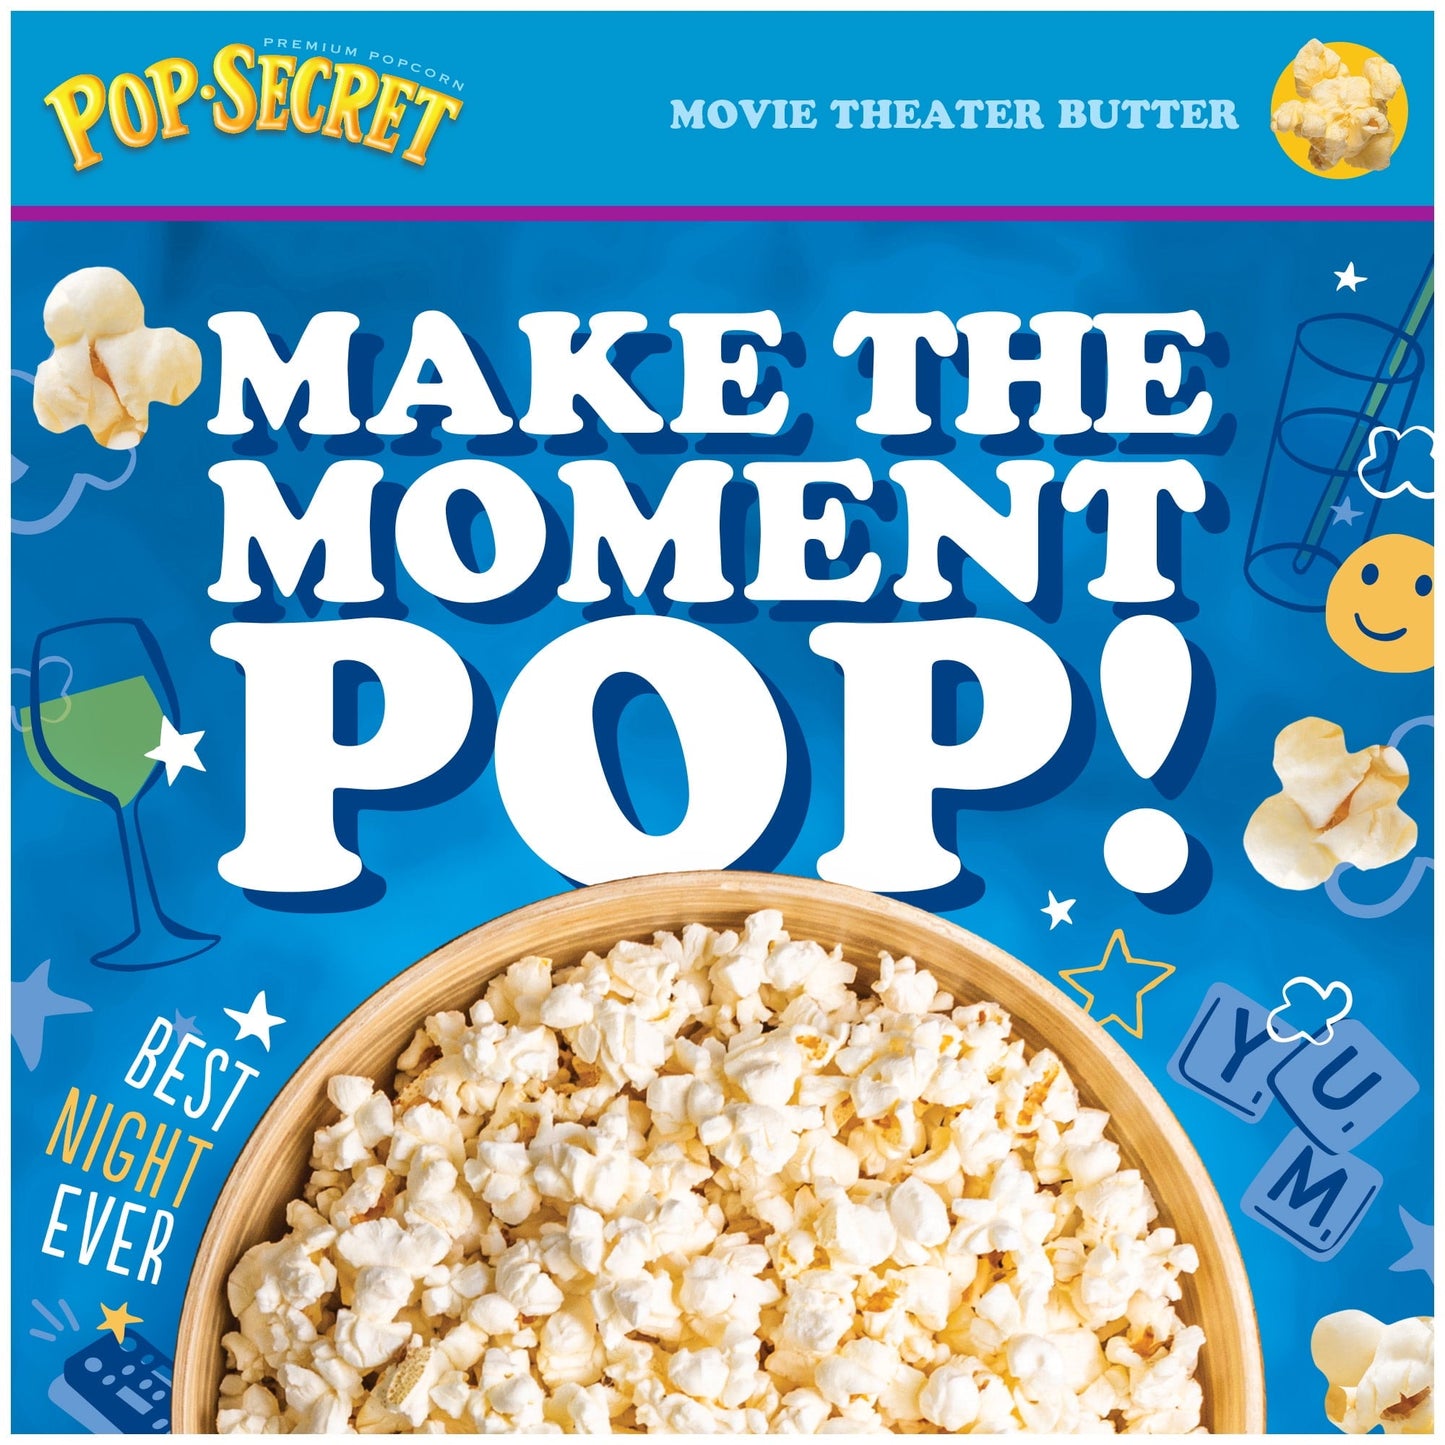 Pop Secret Microwave Popcorn, Movie Theater Butter Flavor, 3.2 oz Sharing Bags, 3 Ct